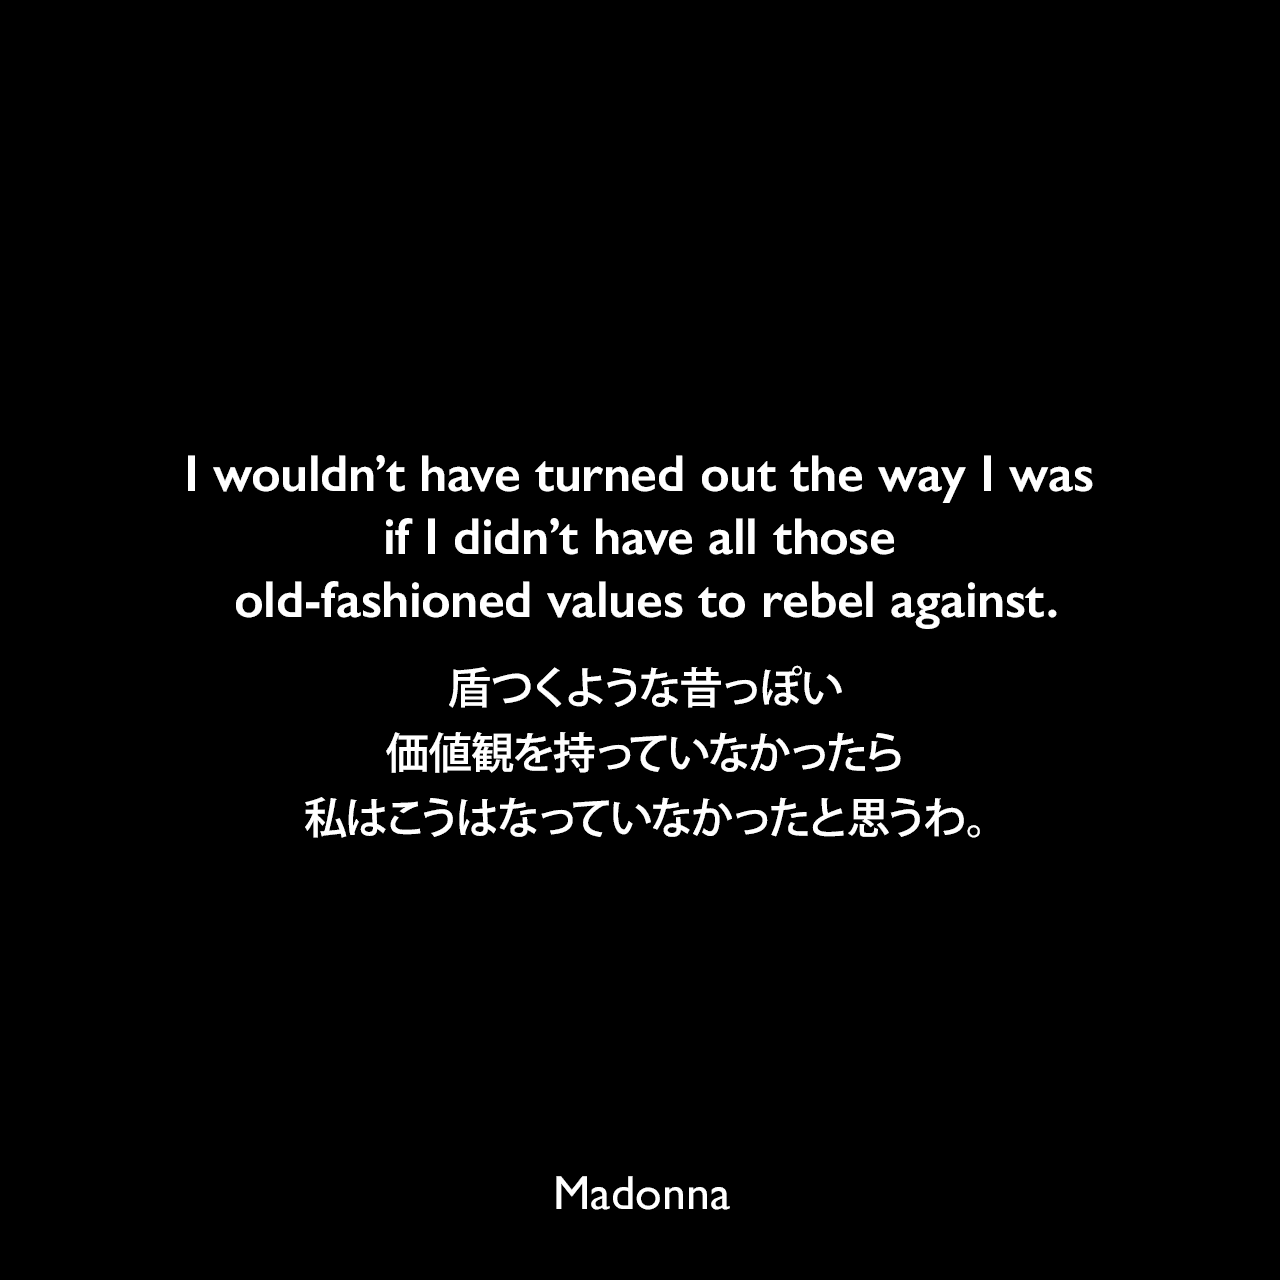 I wouldn’t have turned out the way I was if I didn’t have all those old-fashioned values to rebel against.盾つくような昔っぽい価値観を持っていなかったら、私はこうはなっていなかったと思うわ。Madonna